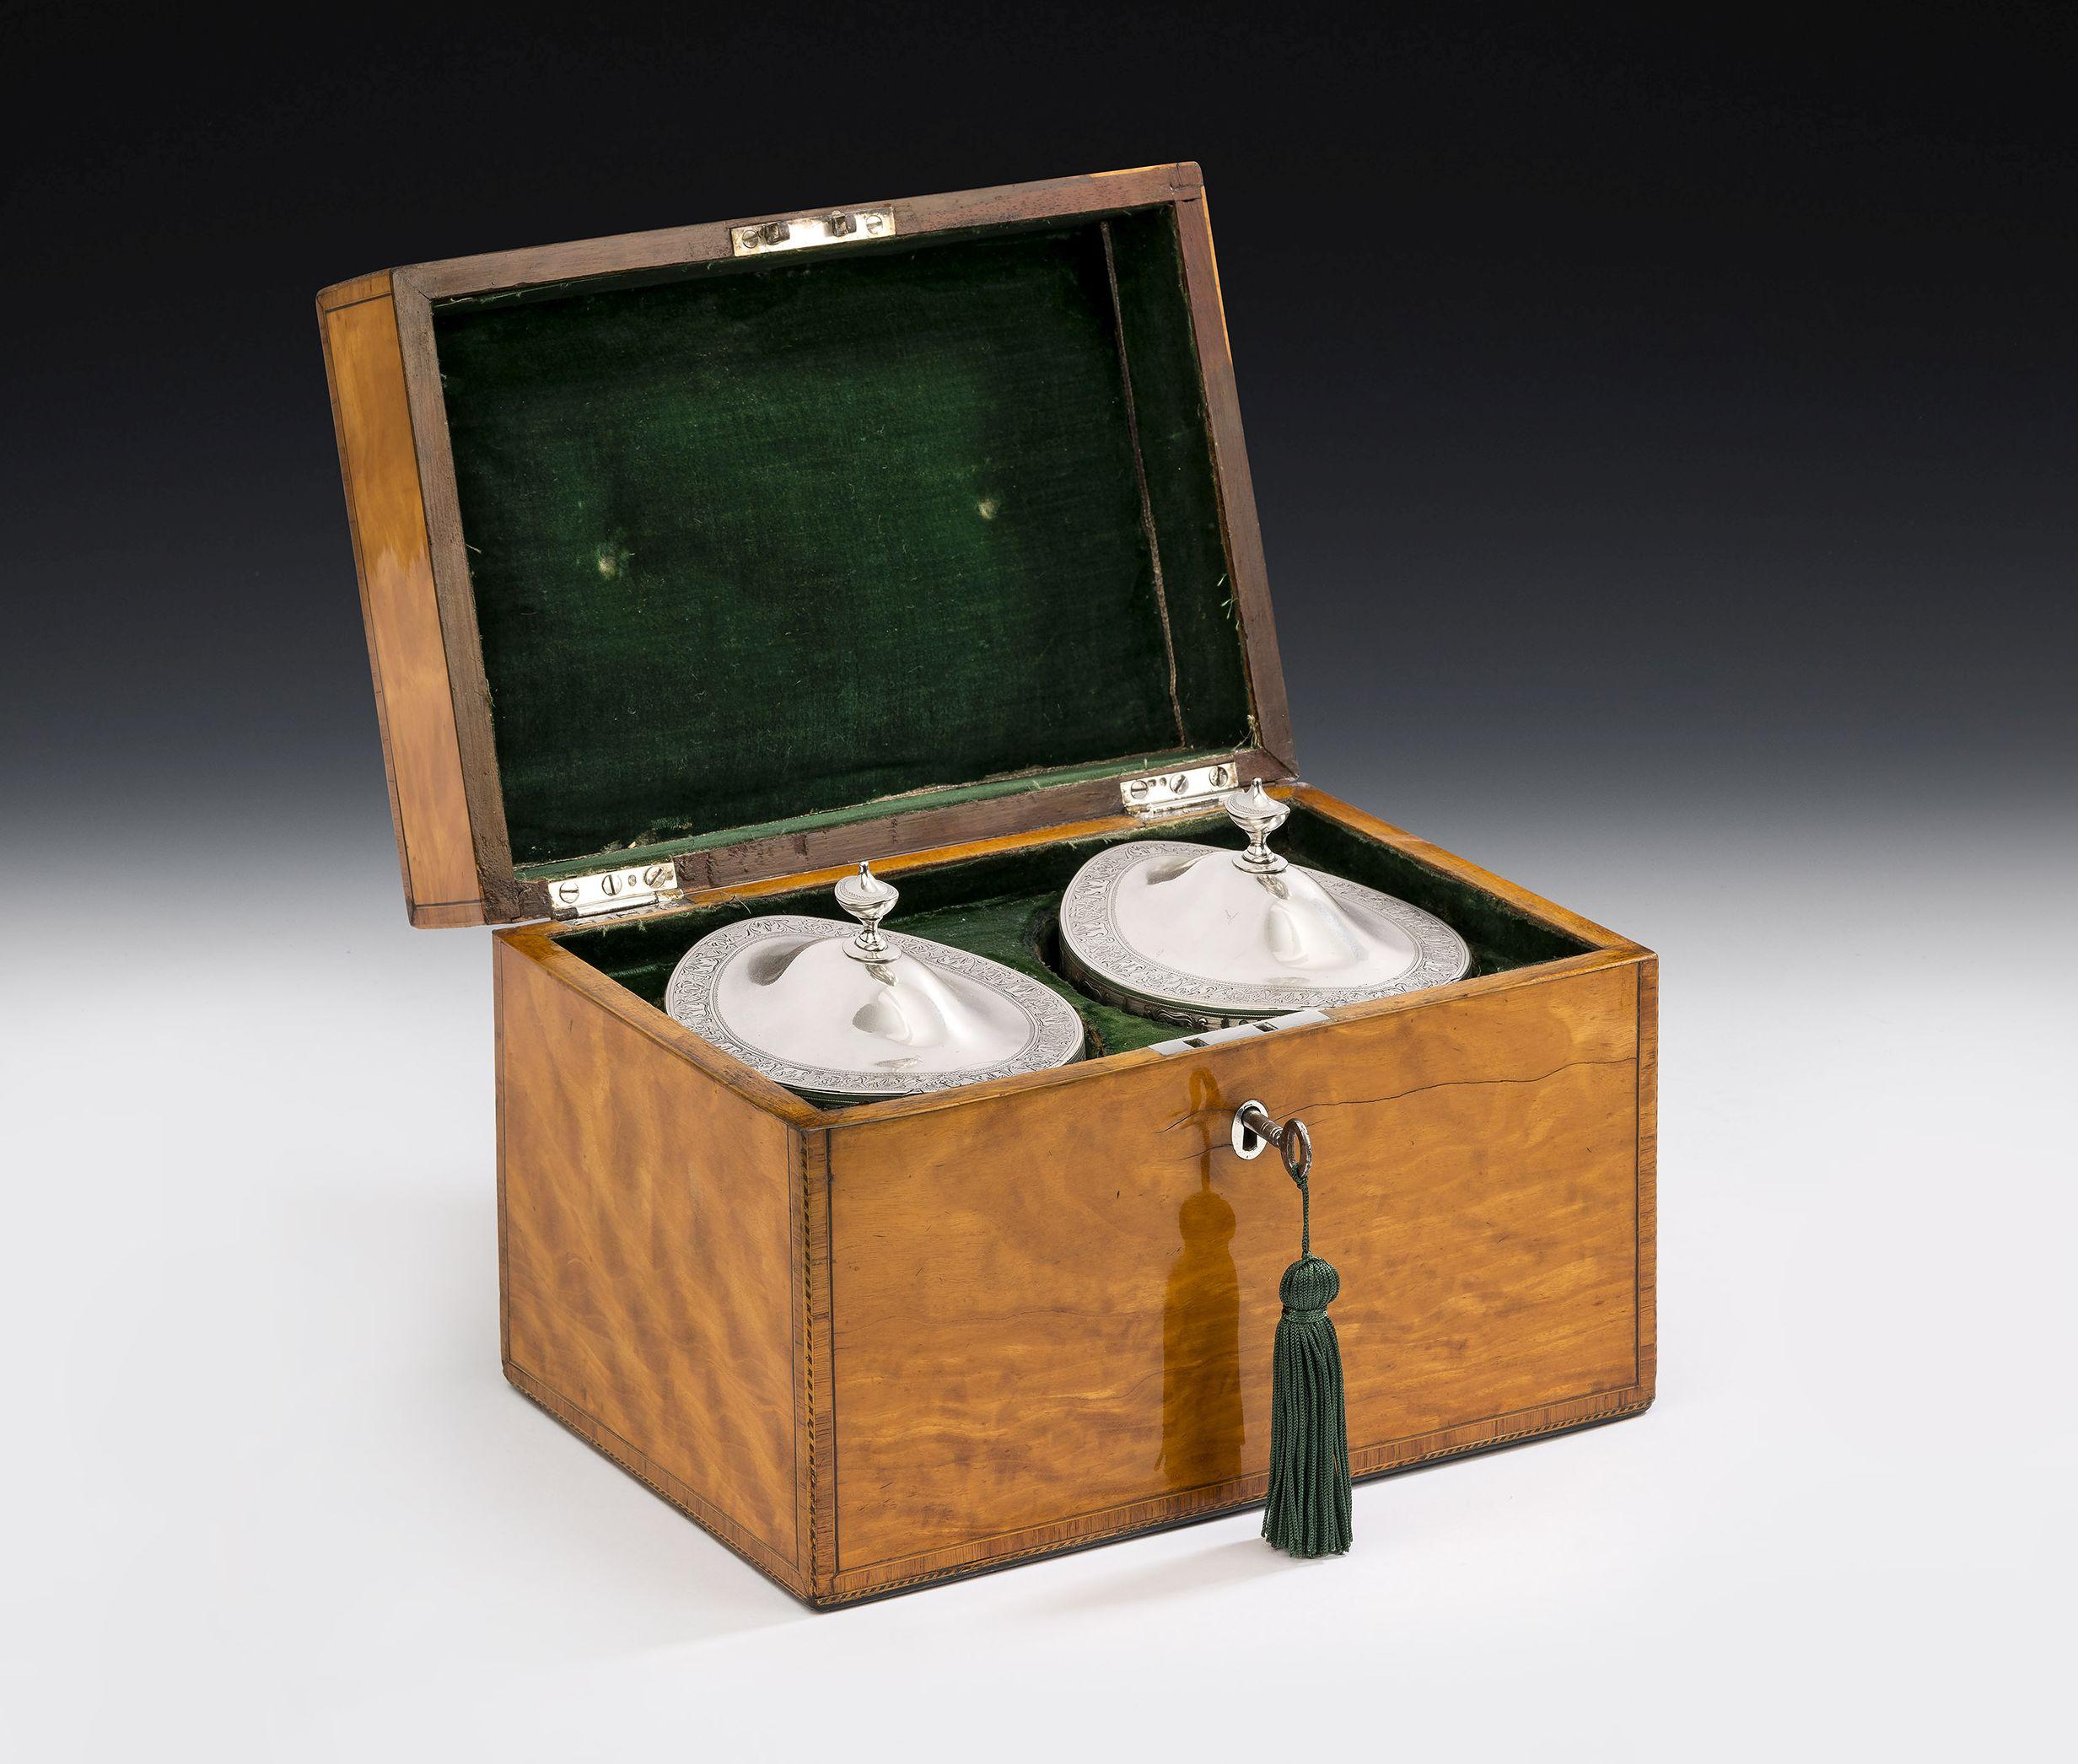 Late 18th Century Pair of Cased George III Tea Caddies Made in London in 1793 by William Frisbee